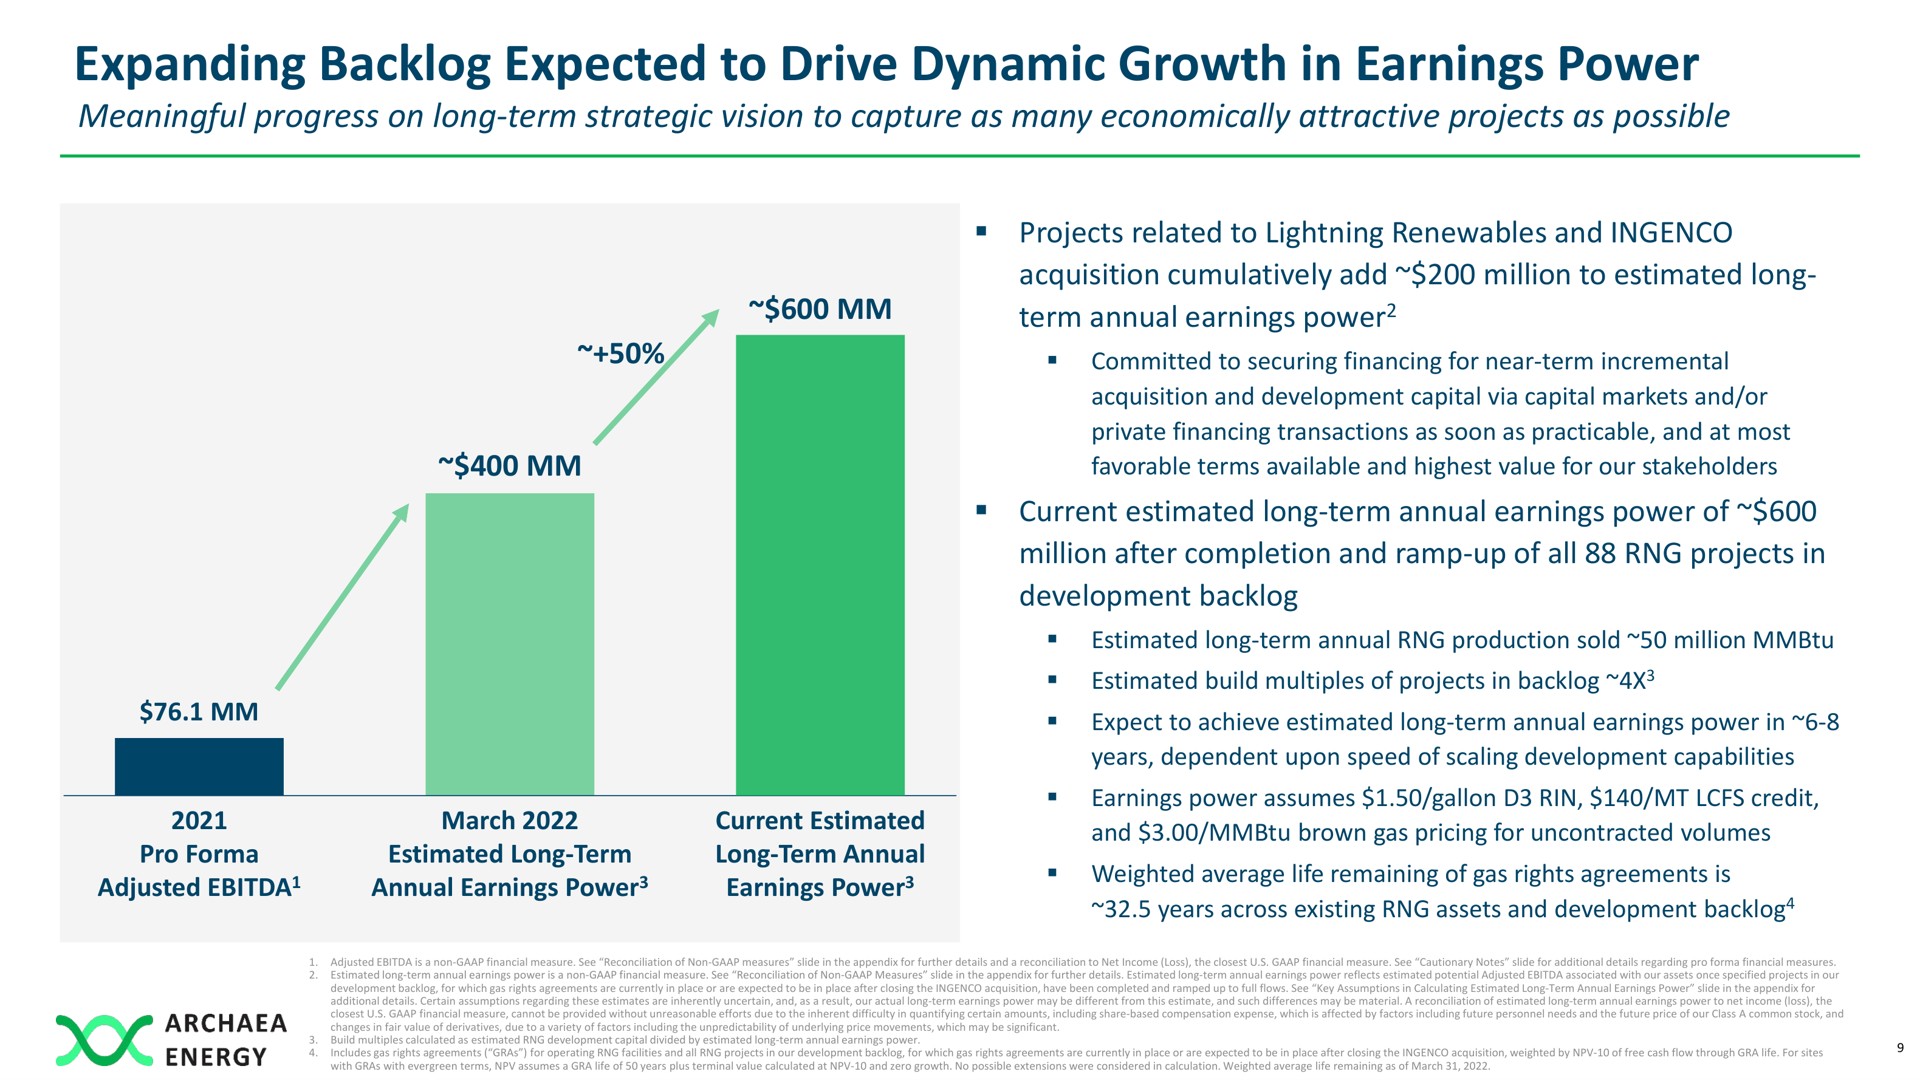 expanding backlog expected to drive dynamic growth in earnings power | Archaea Energy